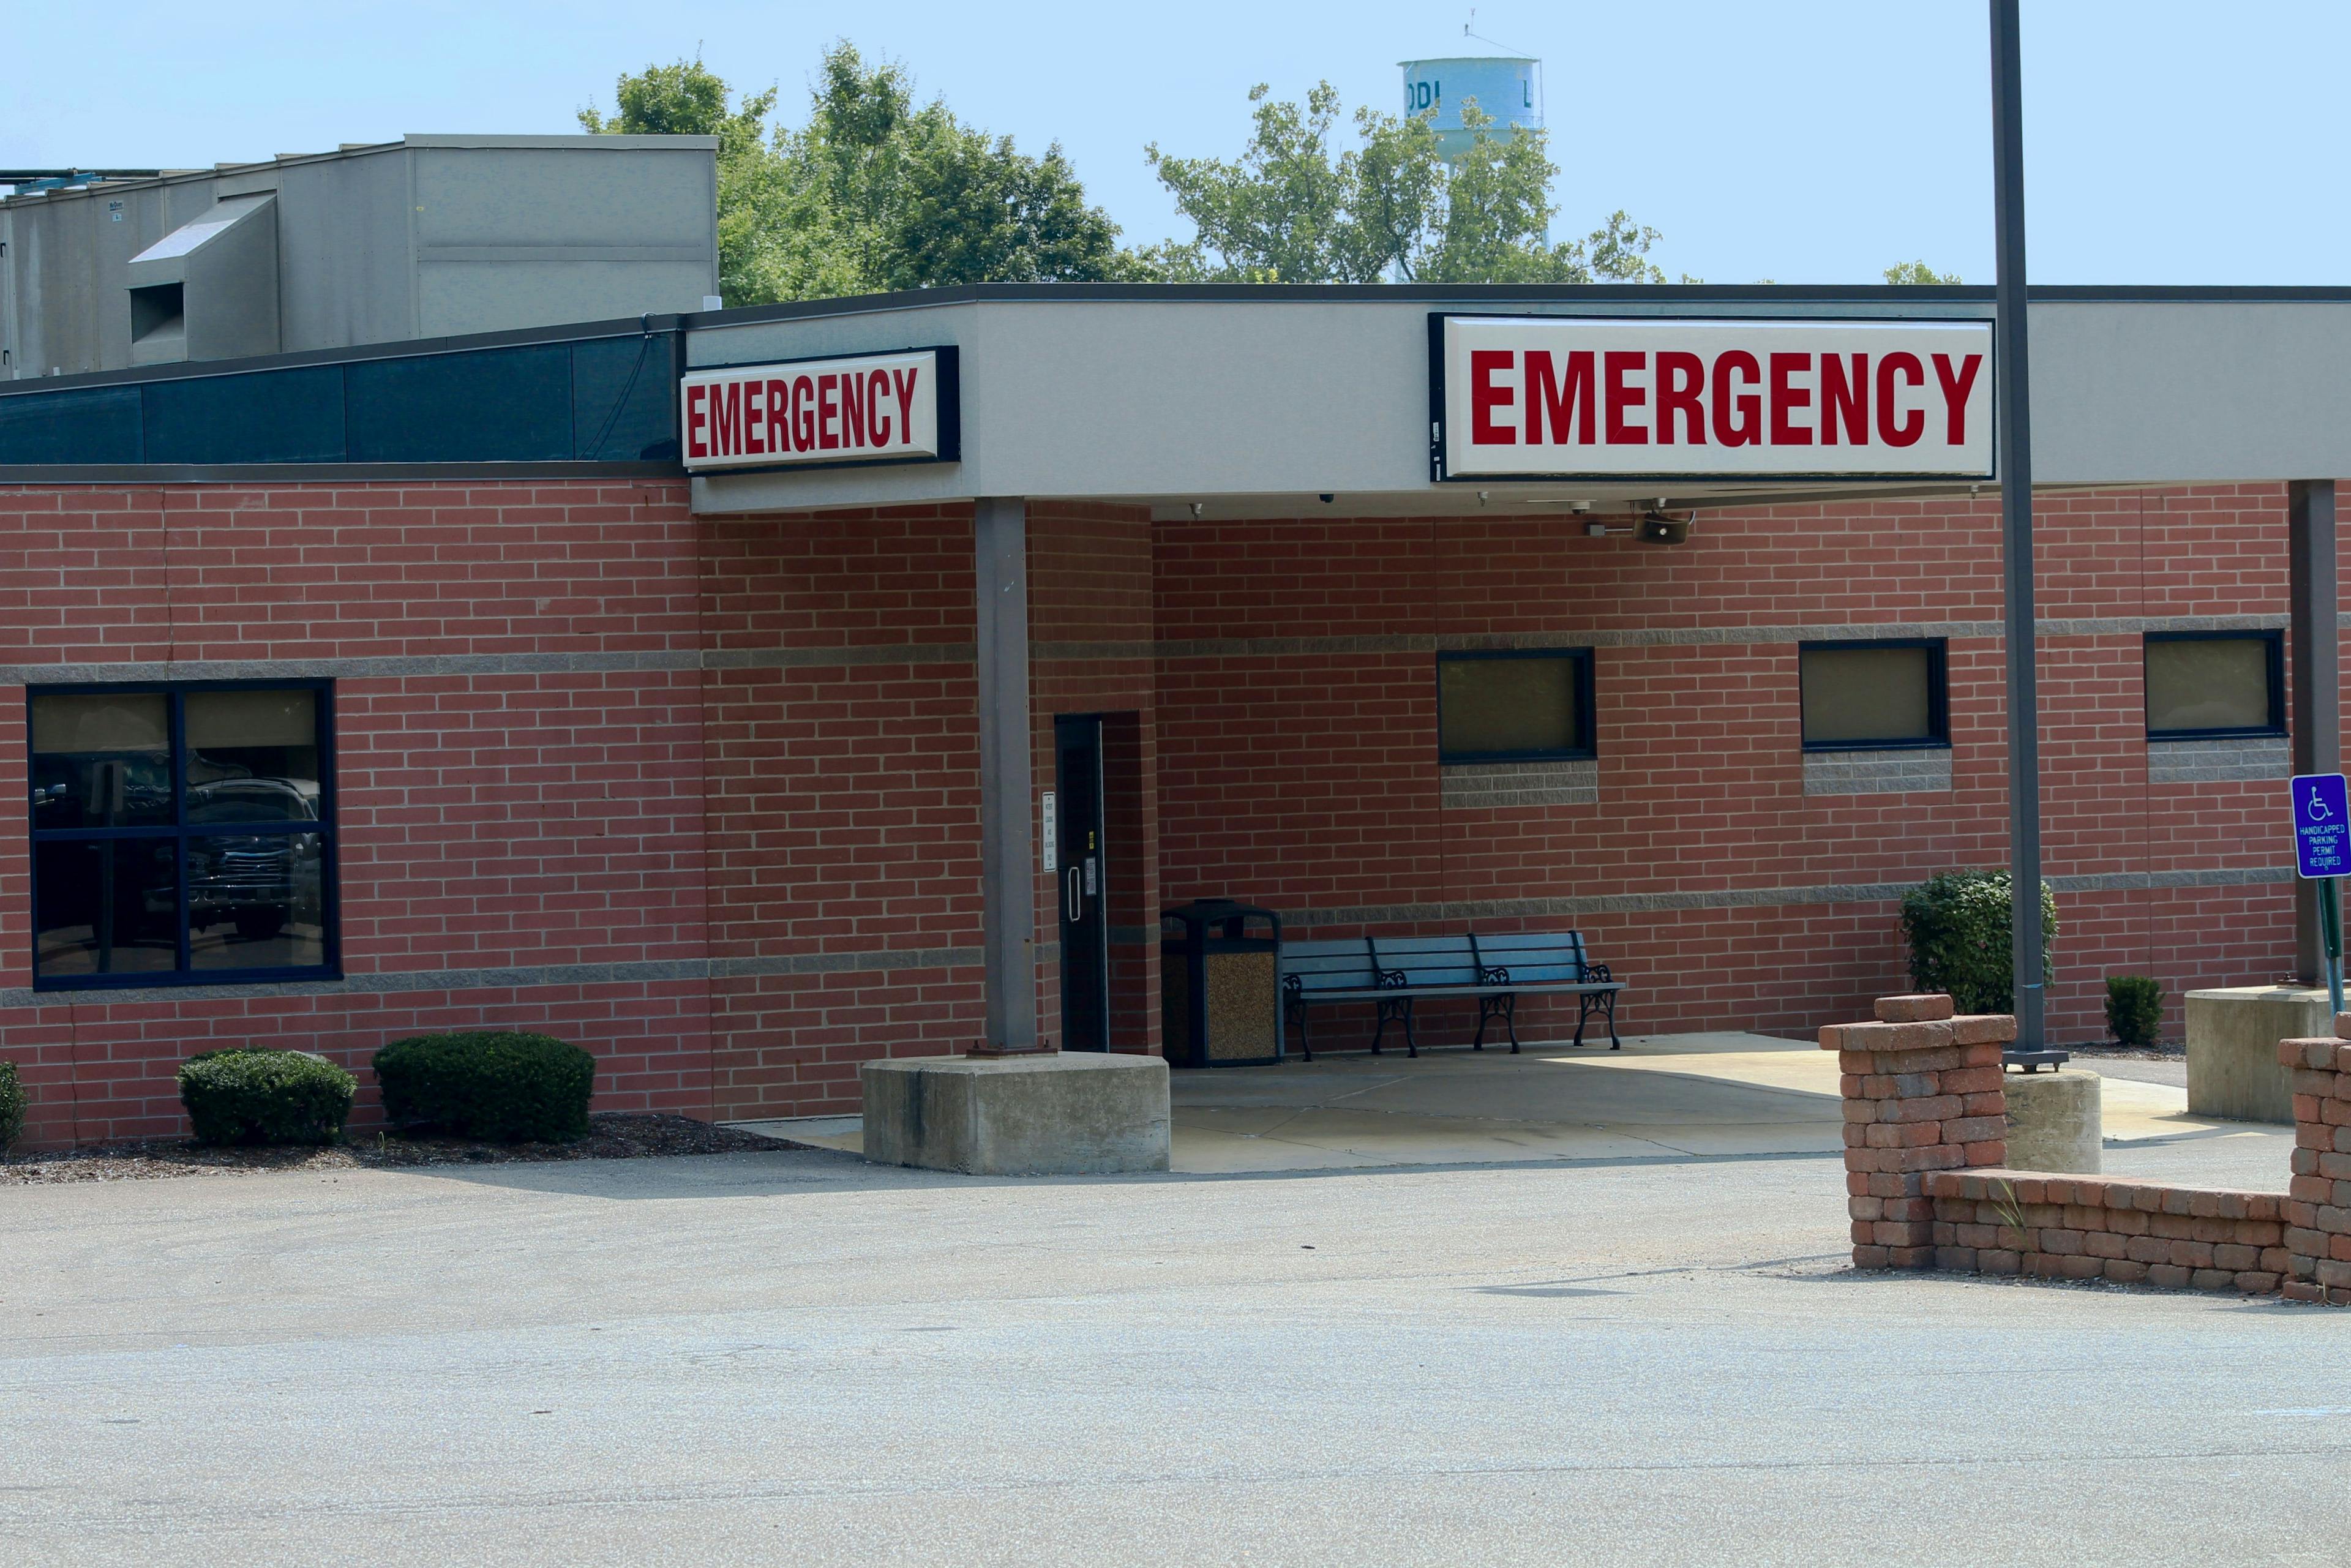  Rural hospital closures affect more than health outcomes